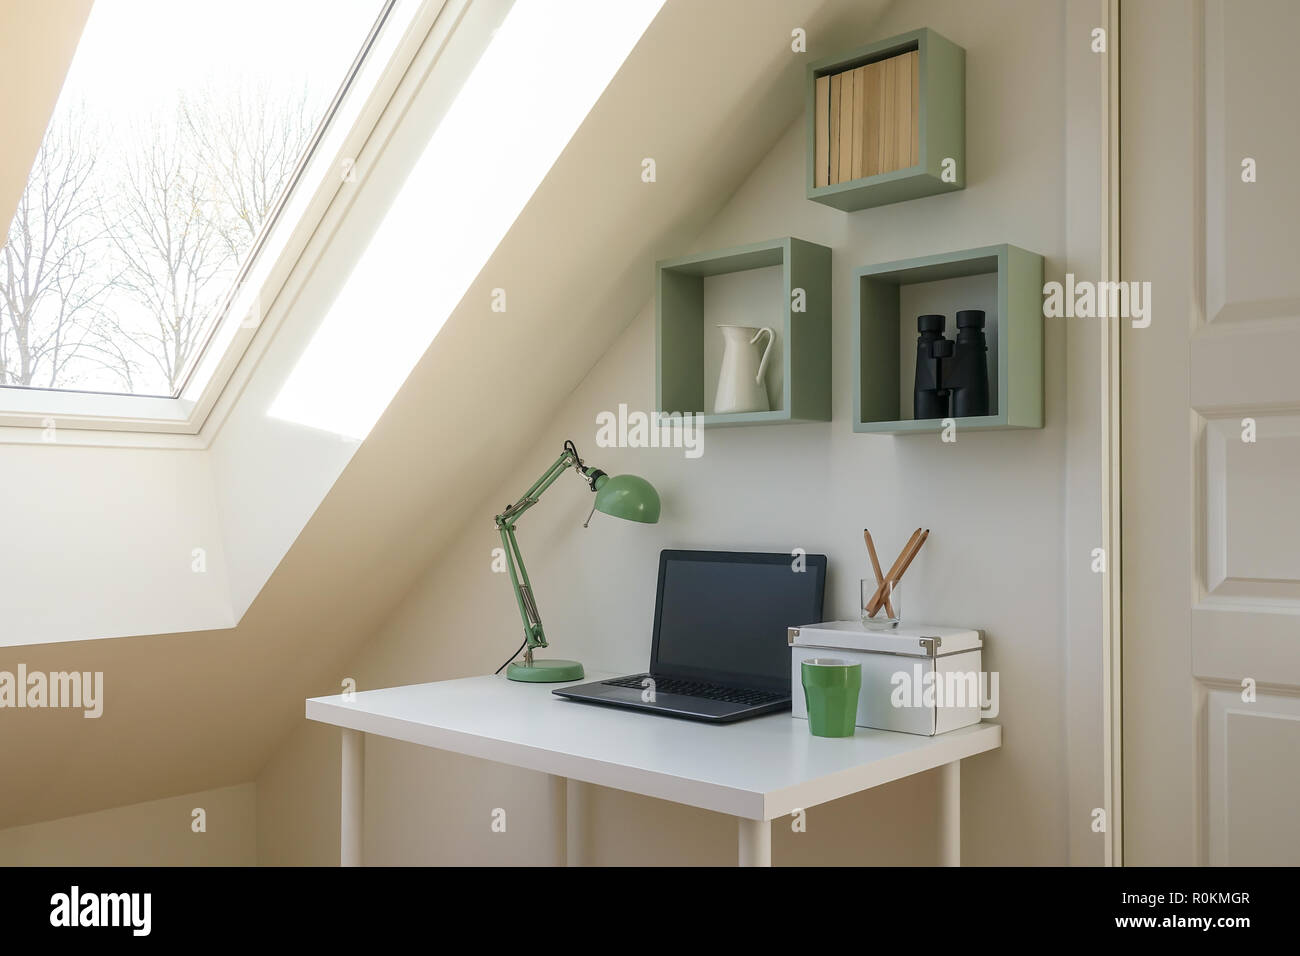 Modern workspace interior. Laptop computer, retro lamp and office accessories on a white desk. Cozy attic / loft apartment with skylight window lettin Stock Photo